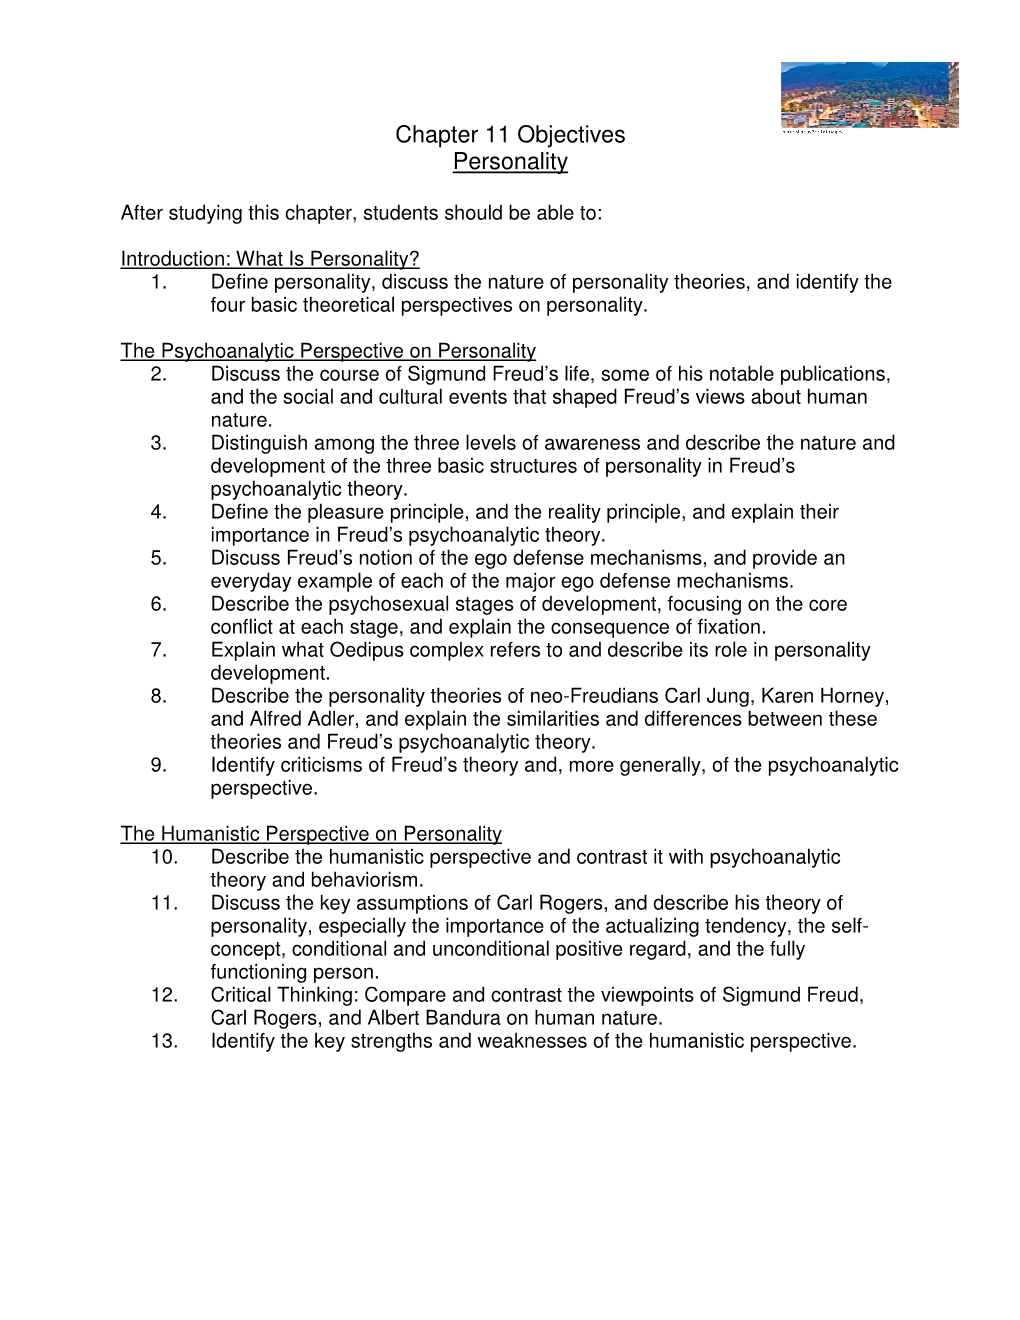 Chapter 11 Objectives Personality